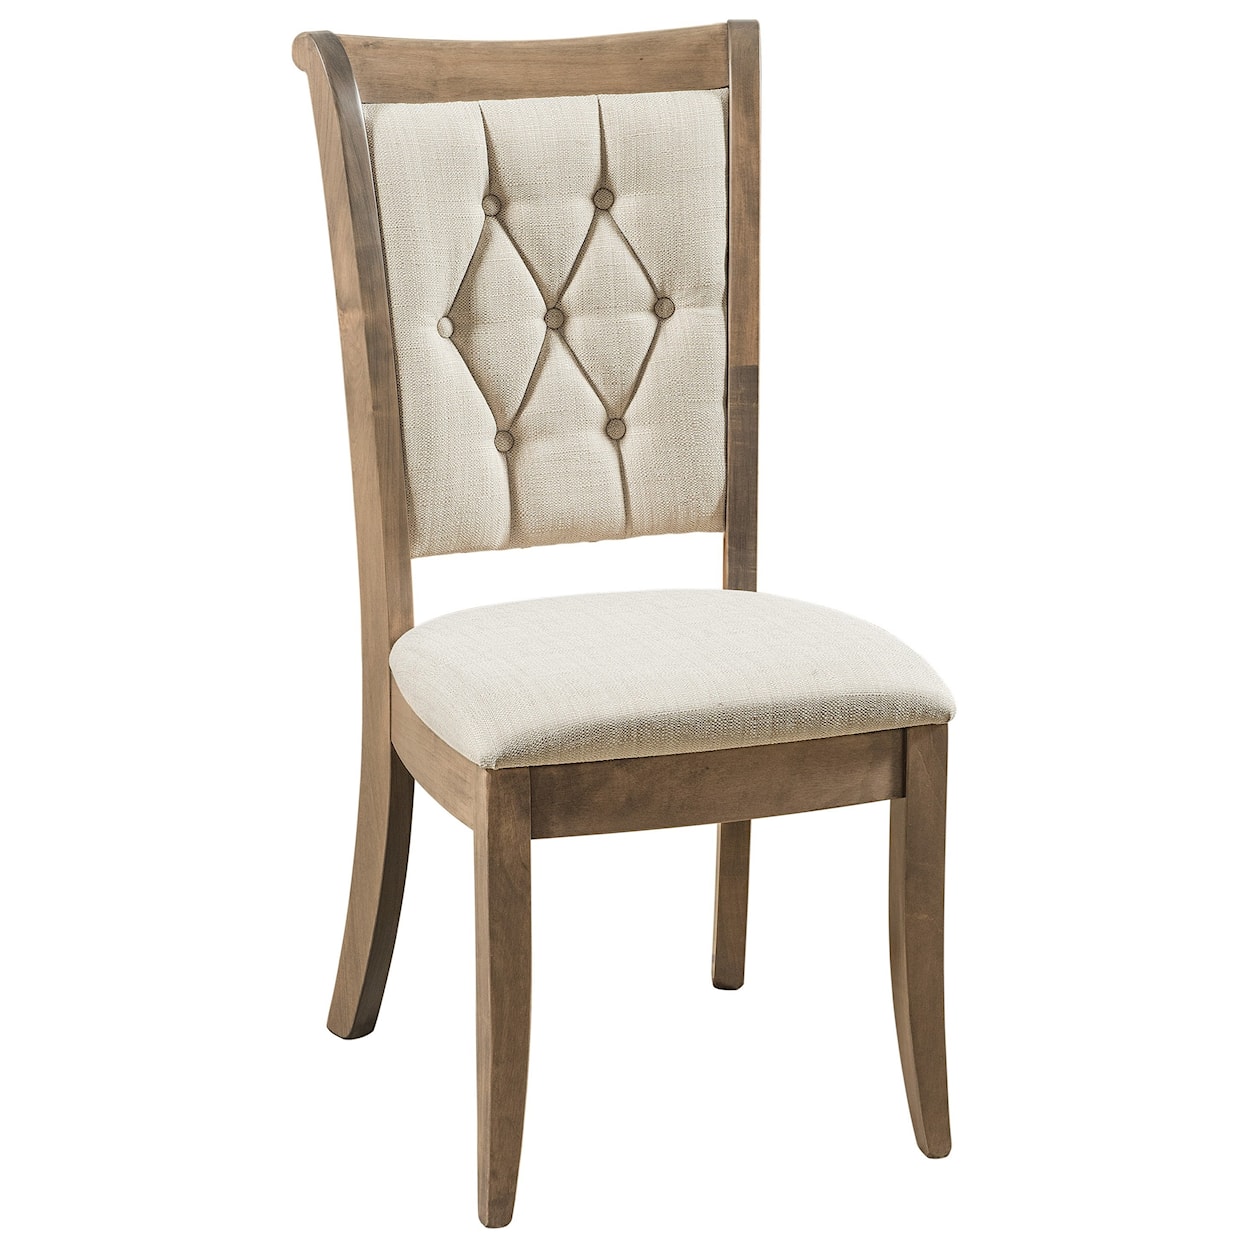 F&N Woodworking Chelsea Side Chair - Leather Seat